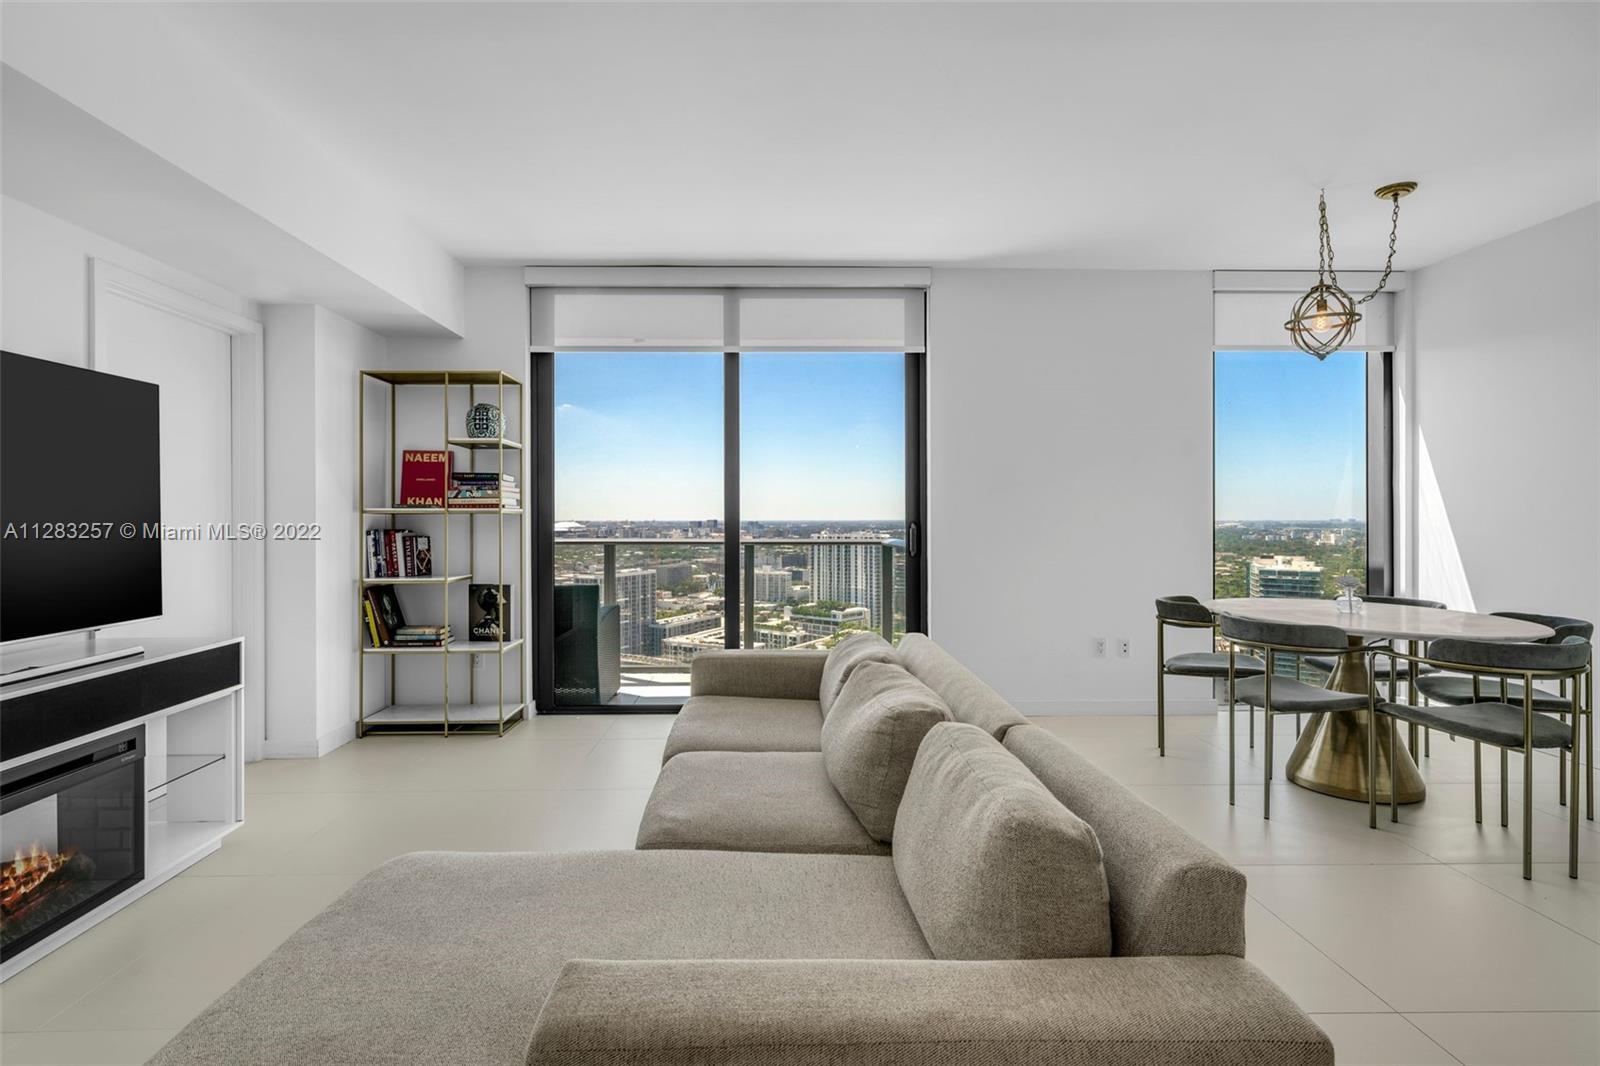 Enjoy gorgeous views and sunsets overlooking Midtown and Wynwood from this West facing 2 bed turnkey